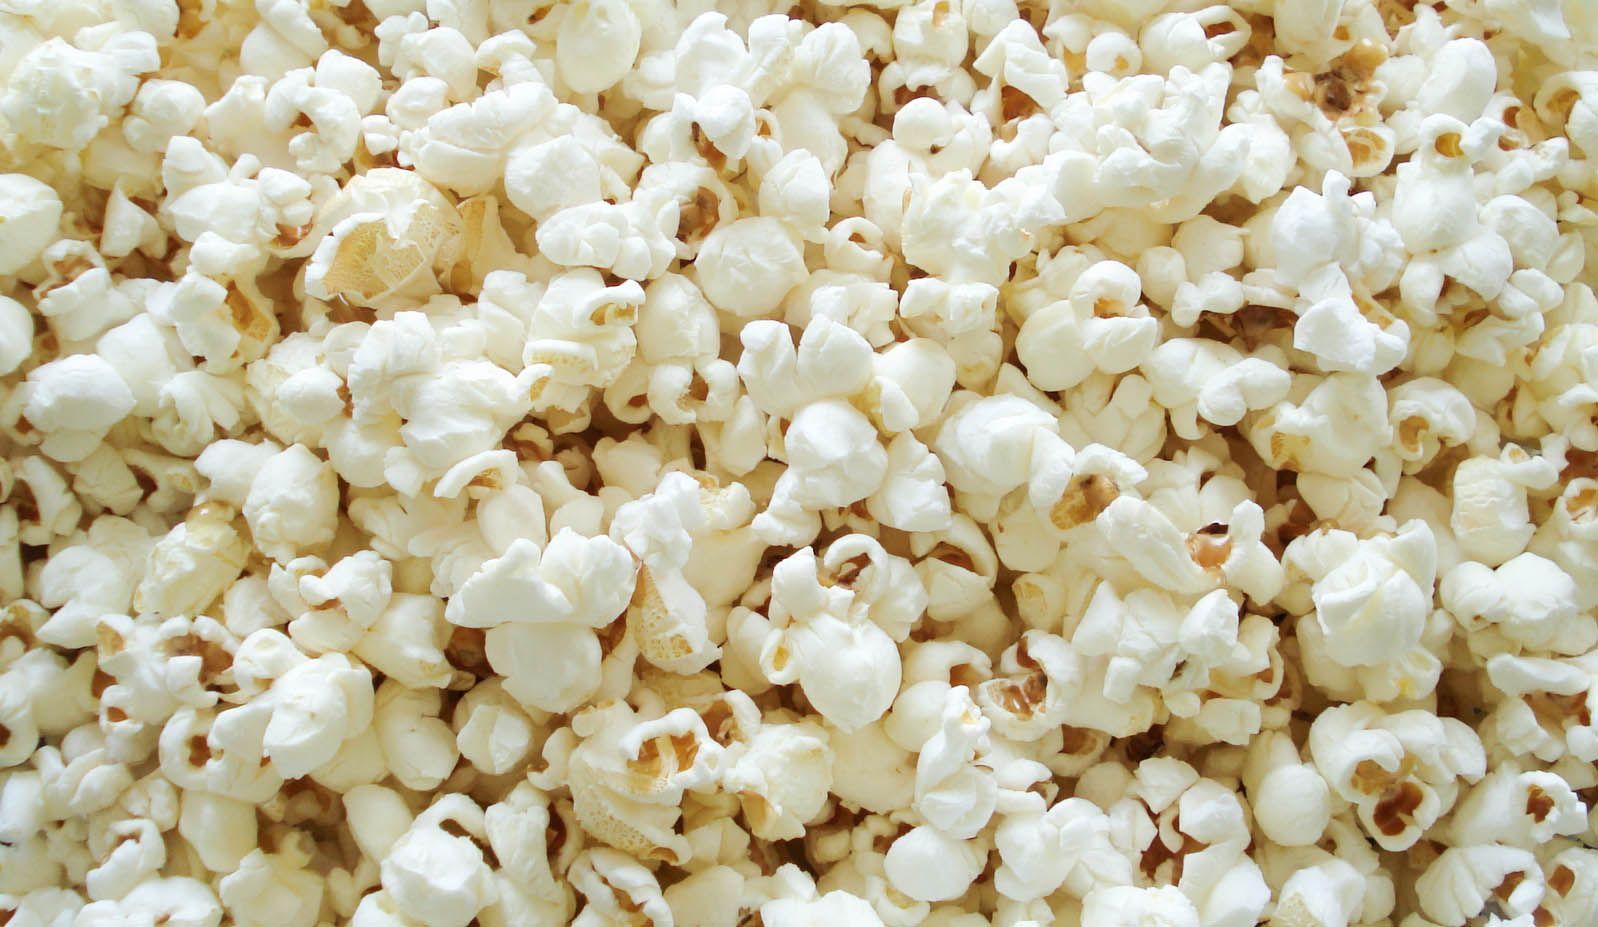 Cinema seamless pattern wallpaper with popcorn Vector Image